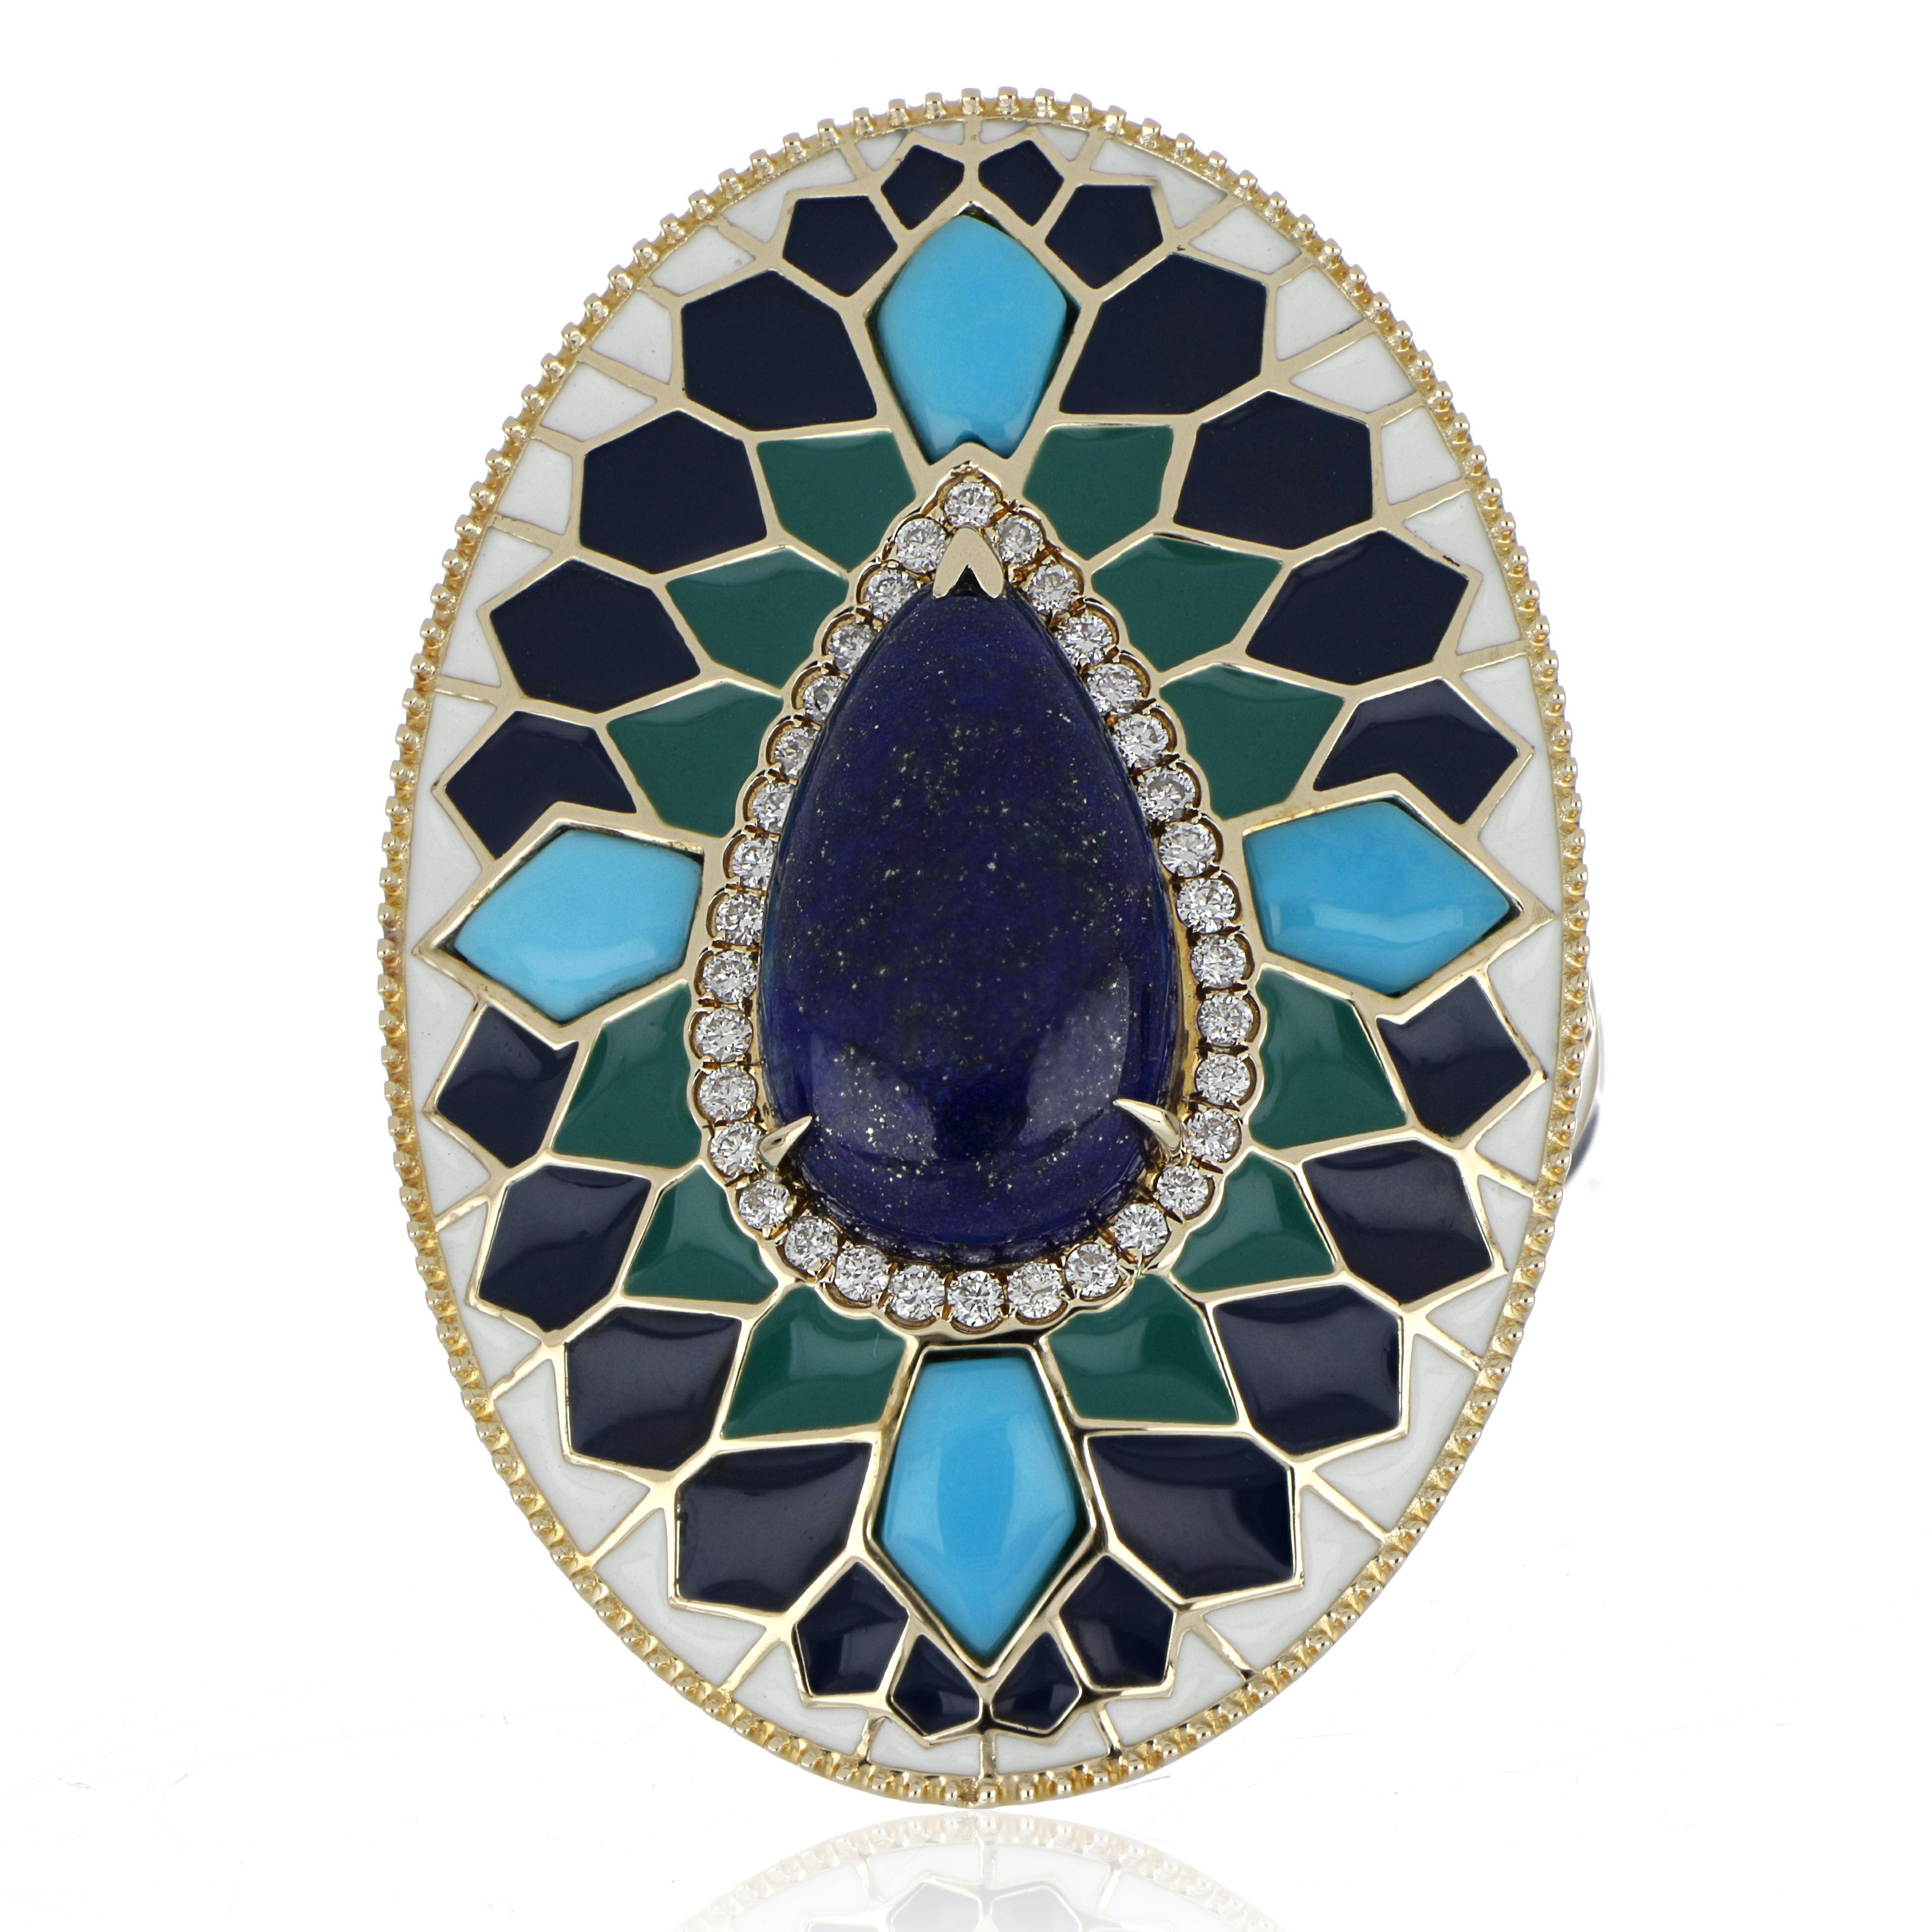 Elegant and exquisite Multi Color Enamel Cocktail 14 K Ring, center set with 3.15 Cts. Cabochon Pear Lapis Lazuli, Surrounded with special cut Turquoise 0.86 Cts accented with Diamonds, weighing approx. 0.24 Cts. Beautifully Hand crafted in 14 Karat